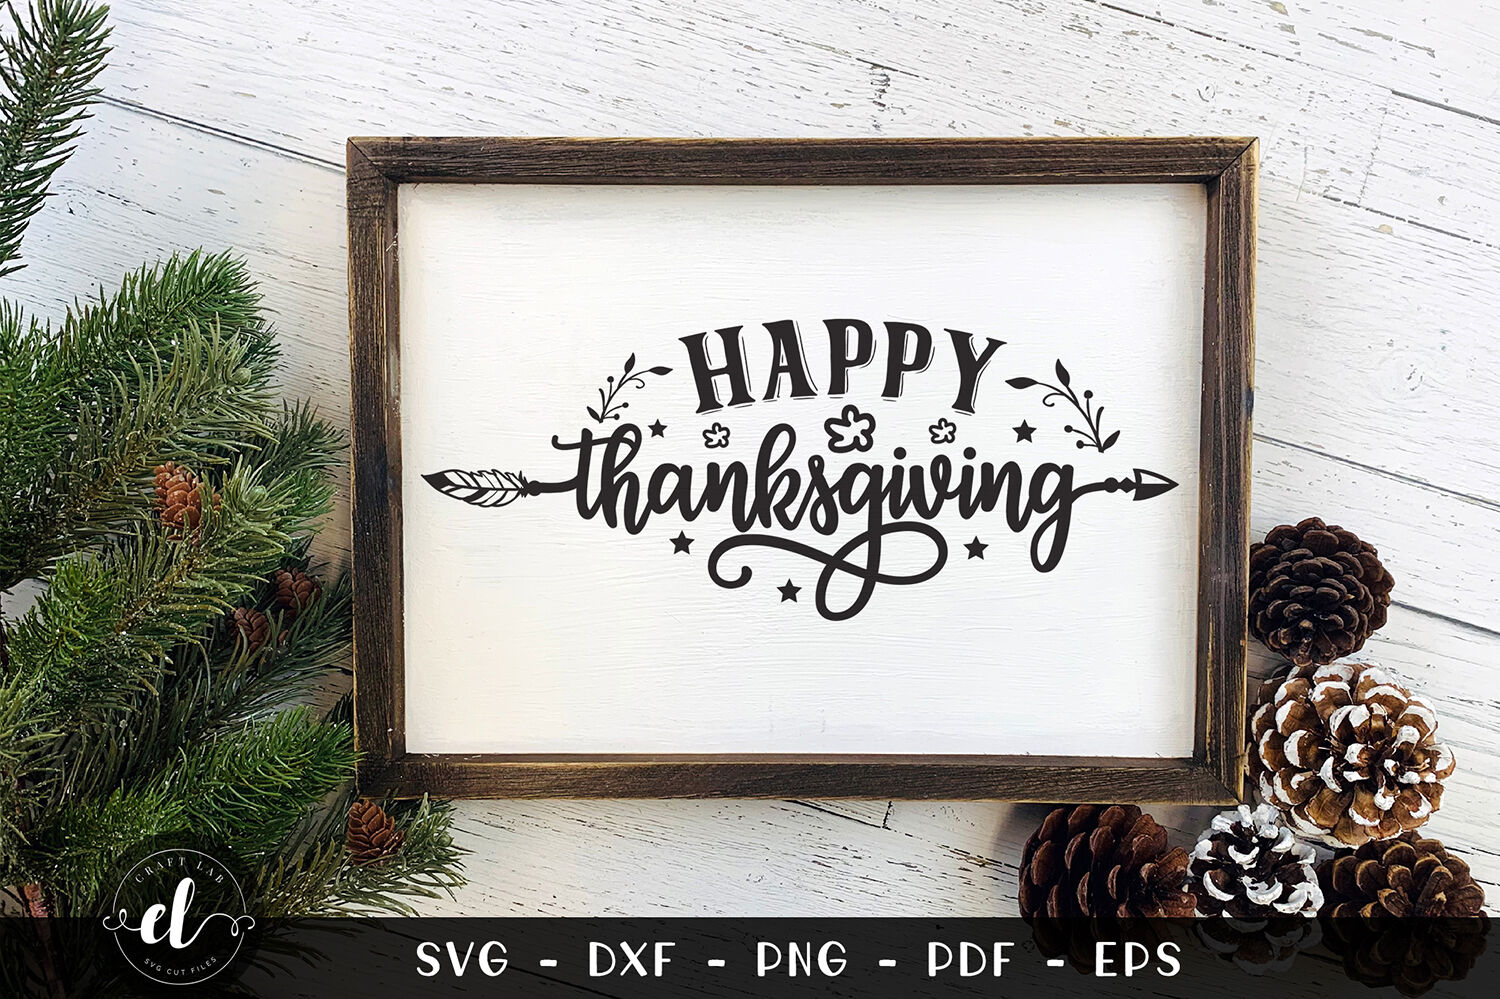 Download Happy Thanksgiving Thanksgiving Svg Thanksgiving Design By Craftlabsvg Thehungryjpeg Com